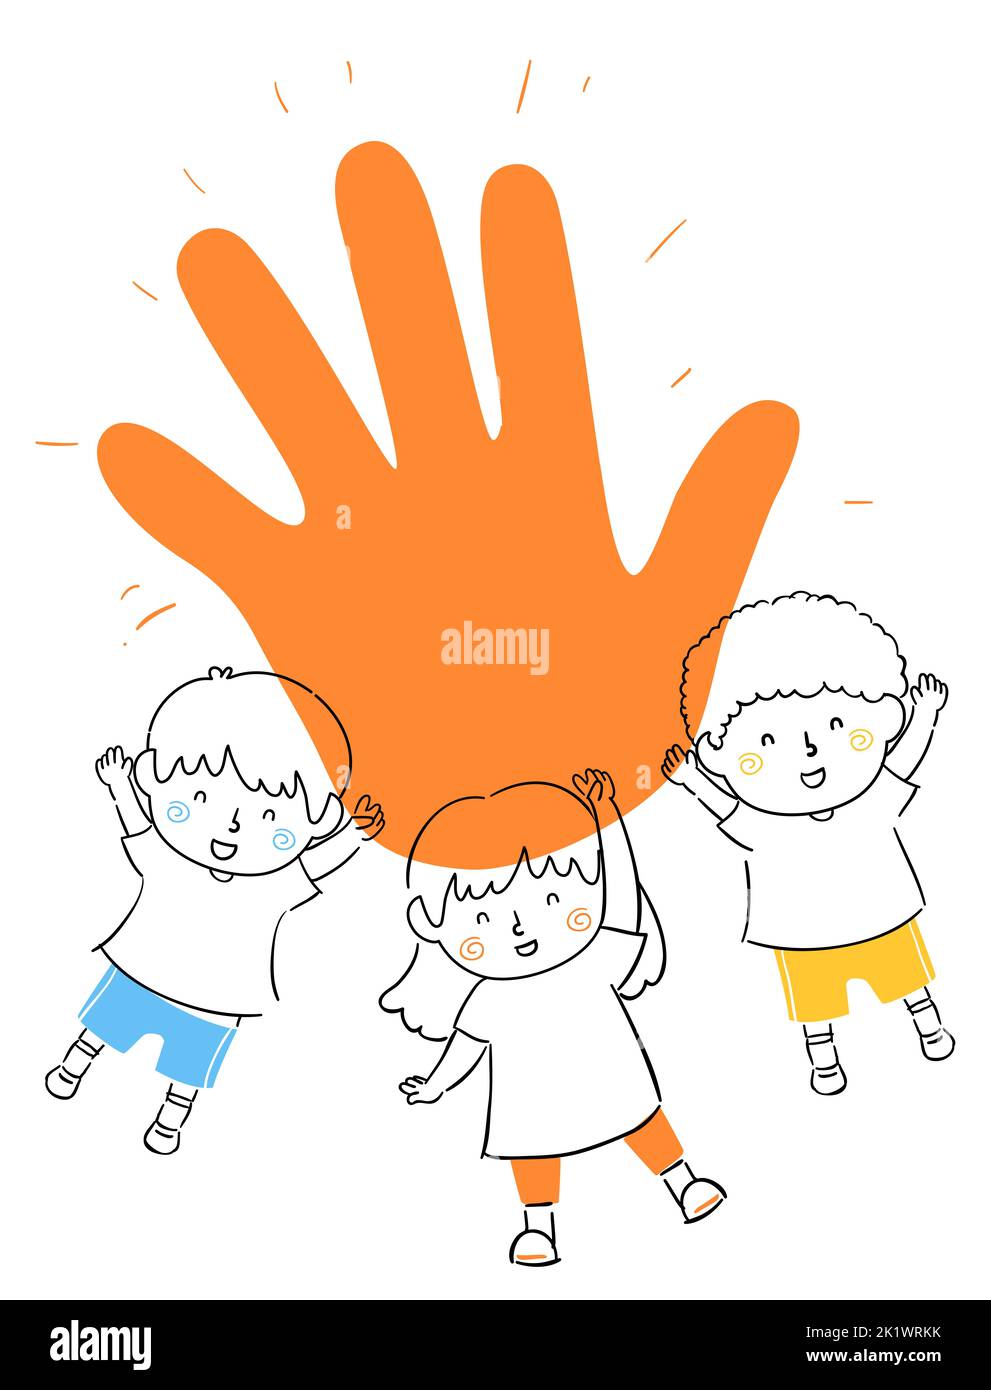 Doodle Illustration of Kids with a Big Hand Print Waving Hello Stock Photo